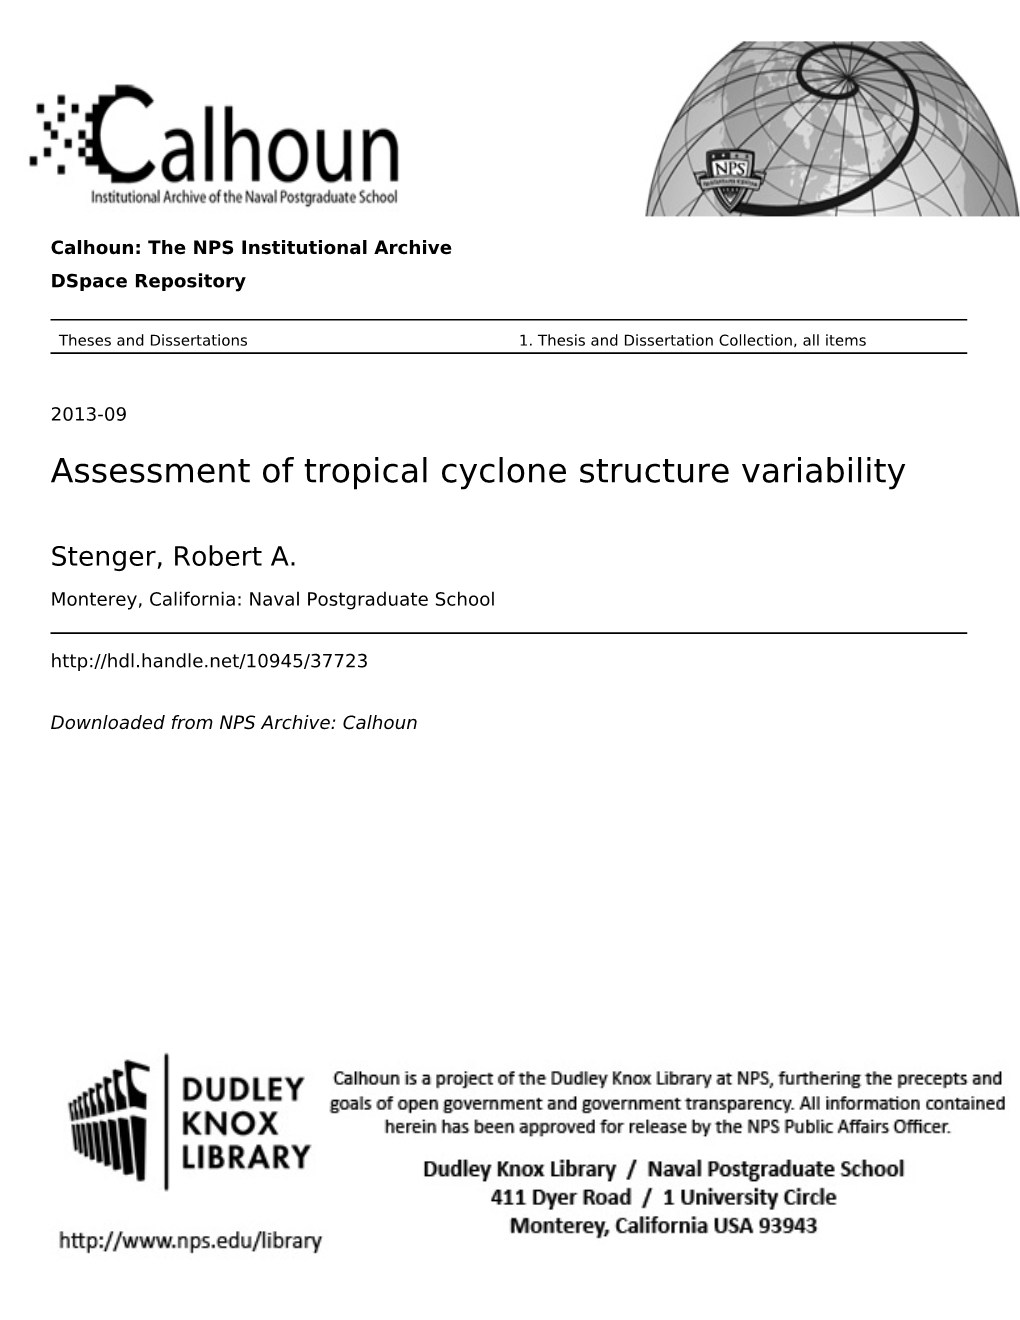 Assessment of Tropical Cyclone Structure Variability